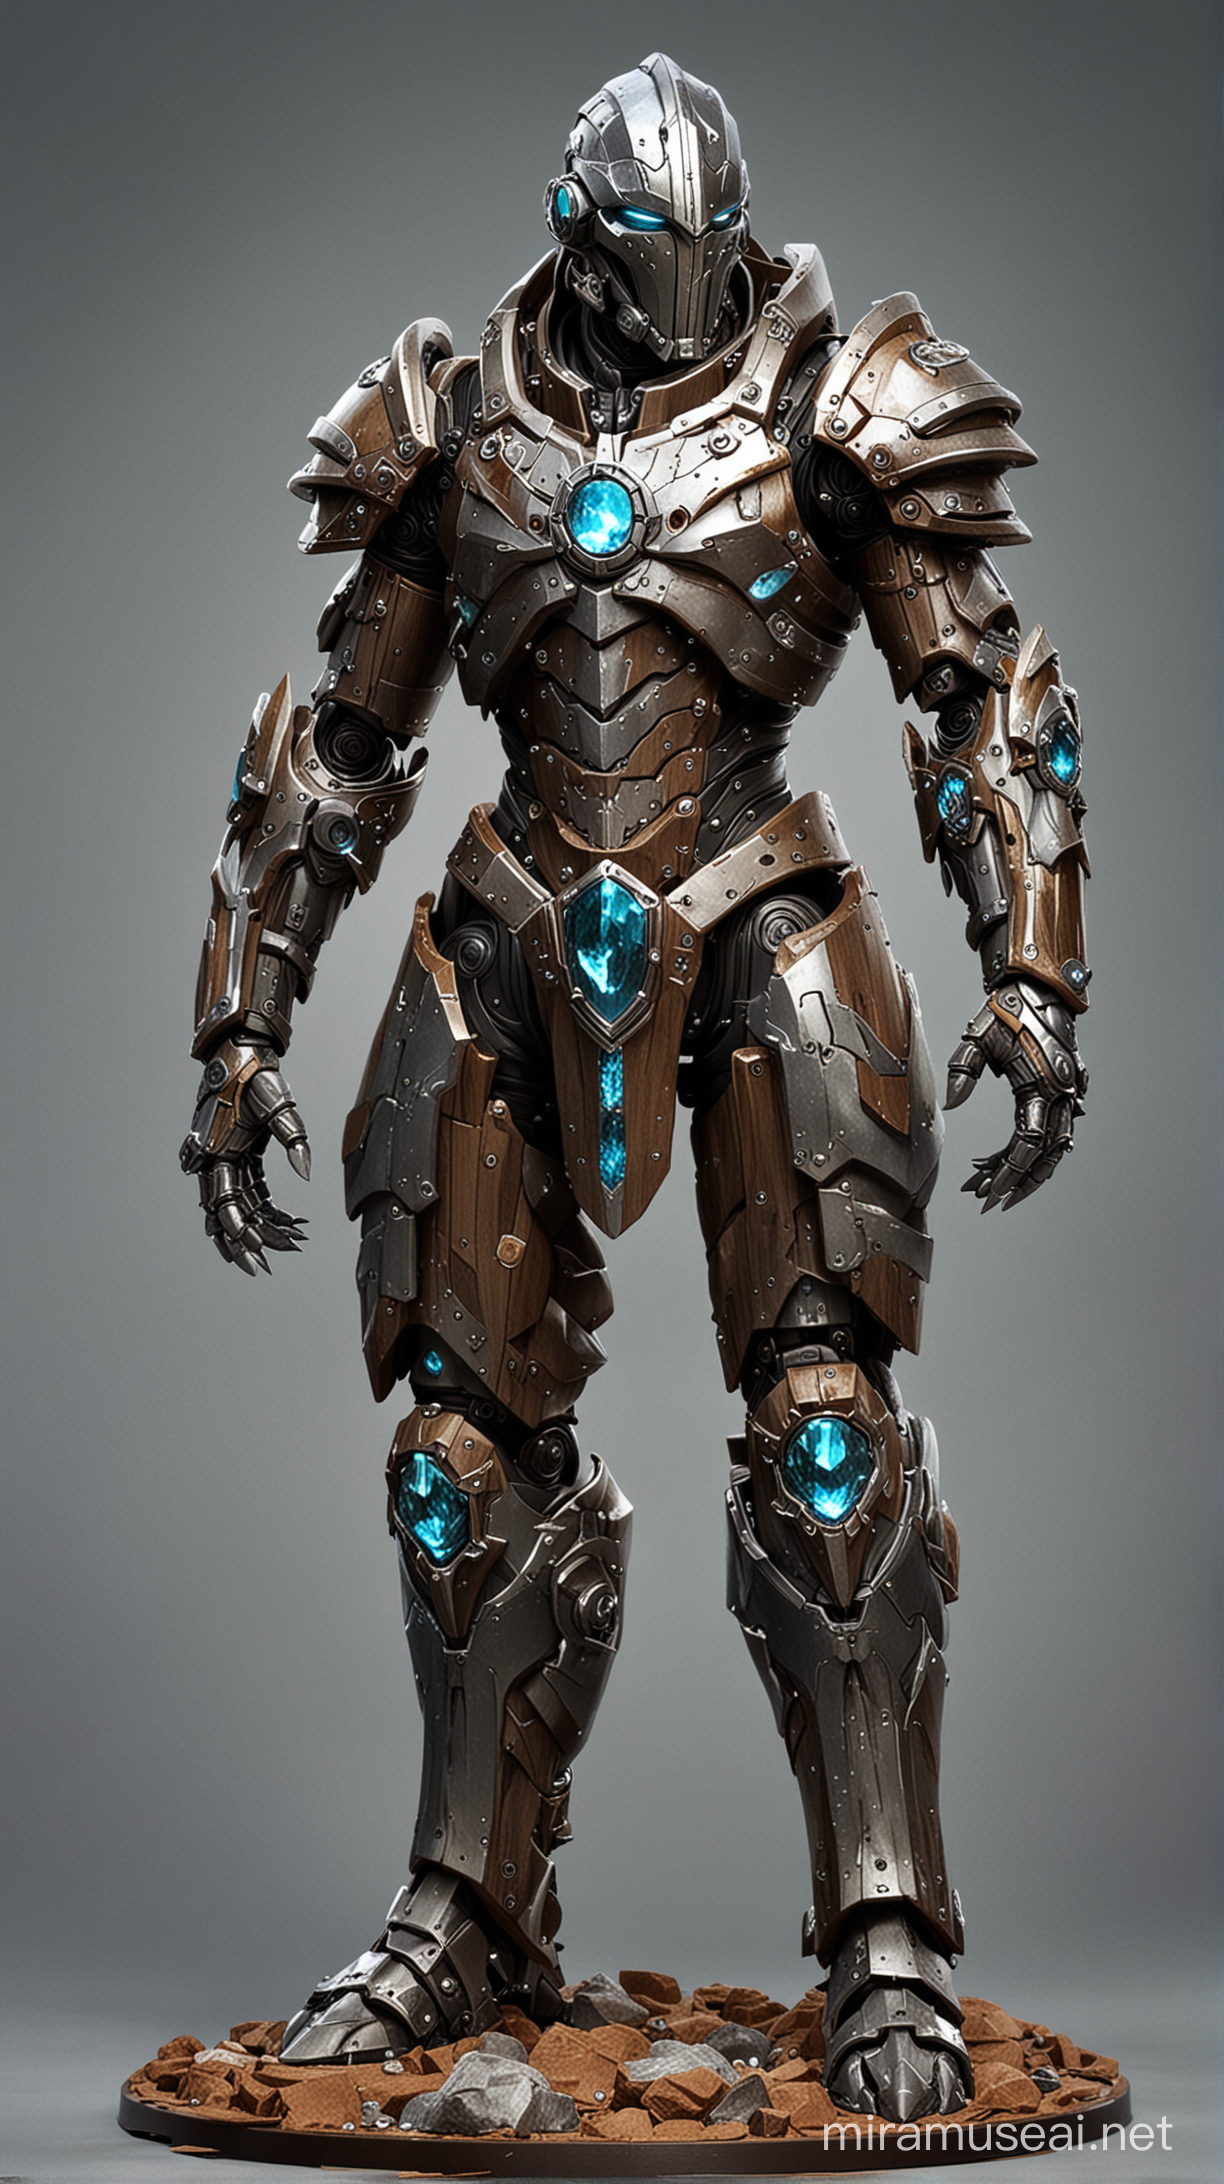 Magical Warforged Construct Wood and Metal Fusion Powered by Crystals